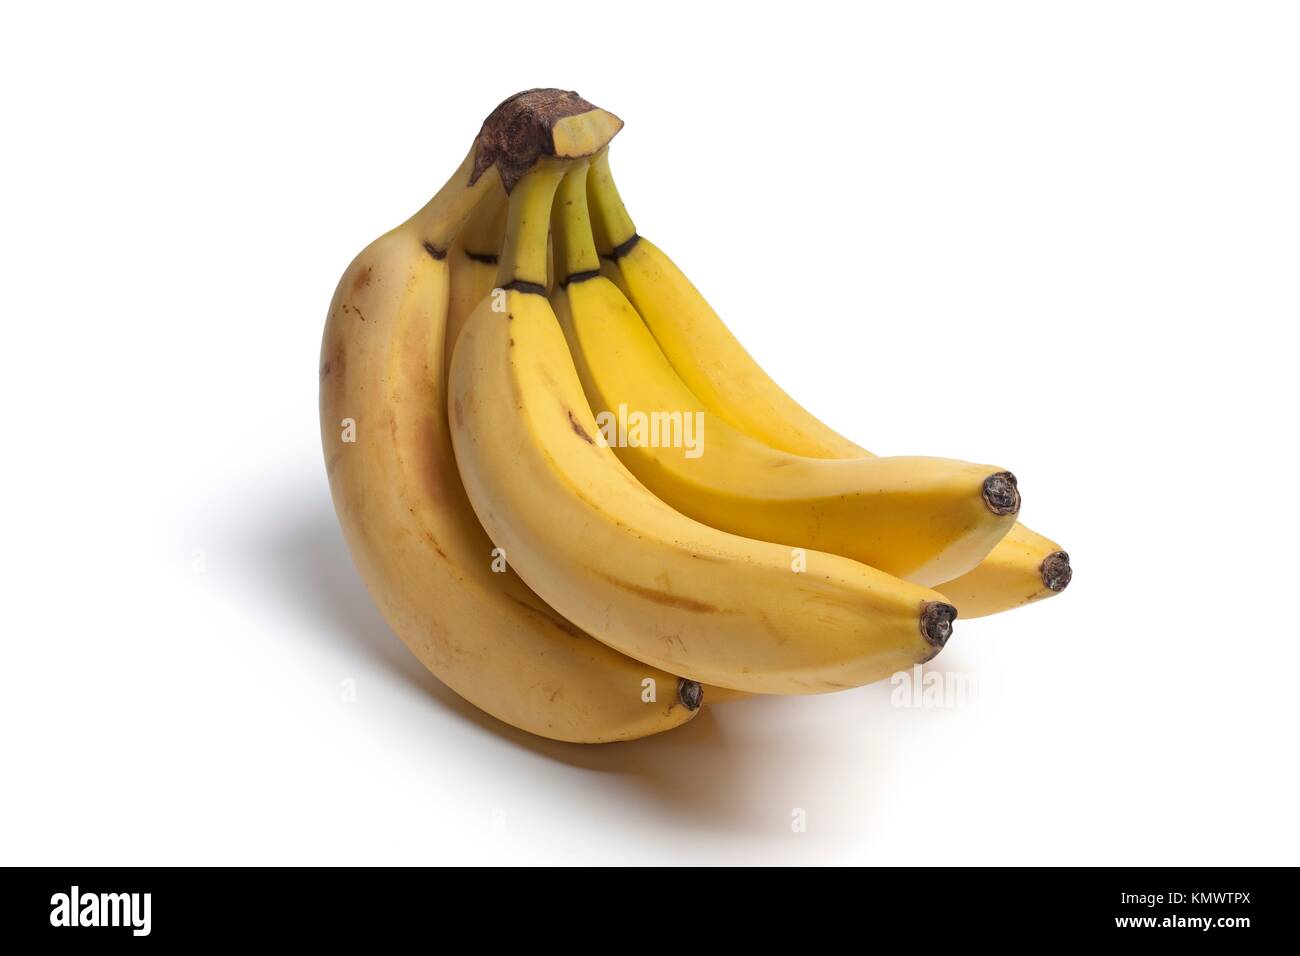 Bunch of unpeeled bananas on white background Stock Photo